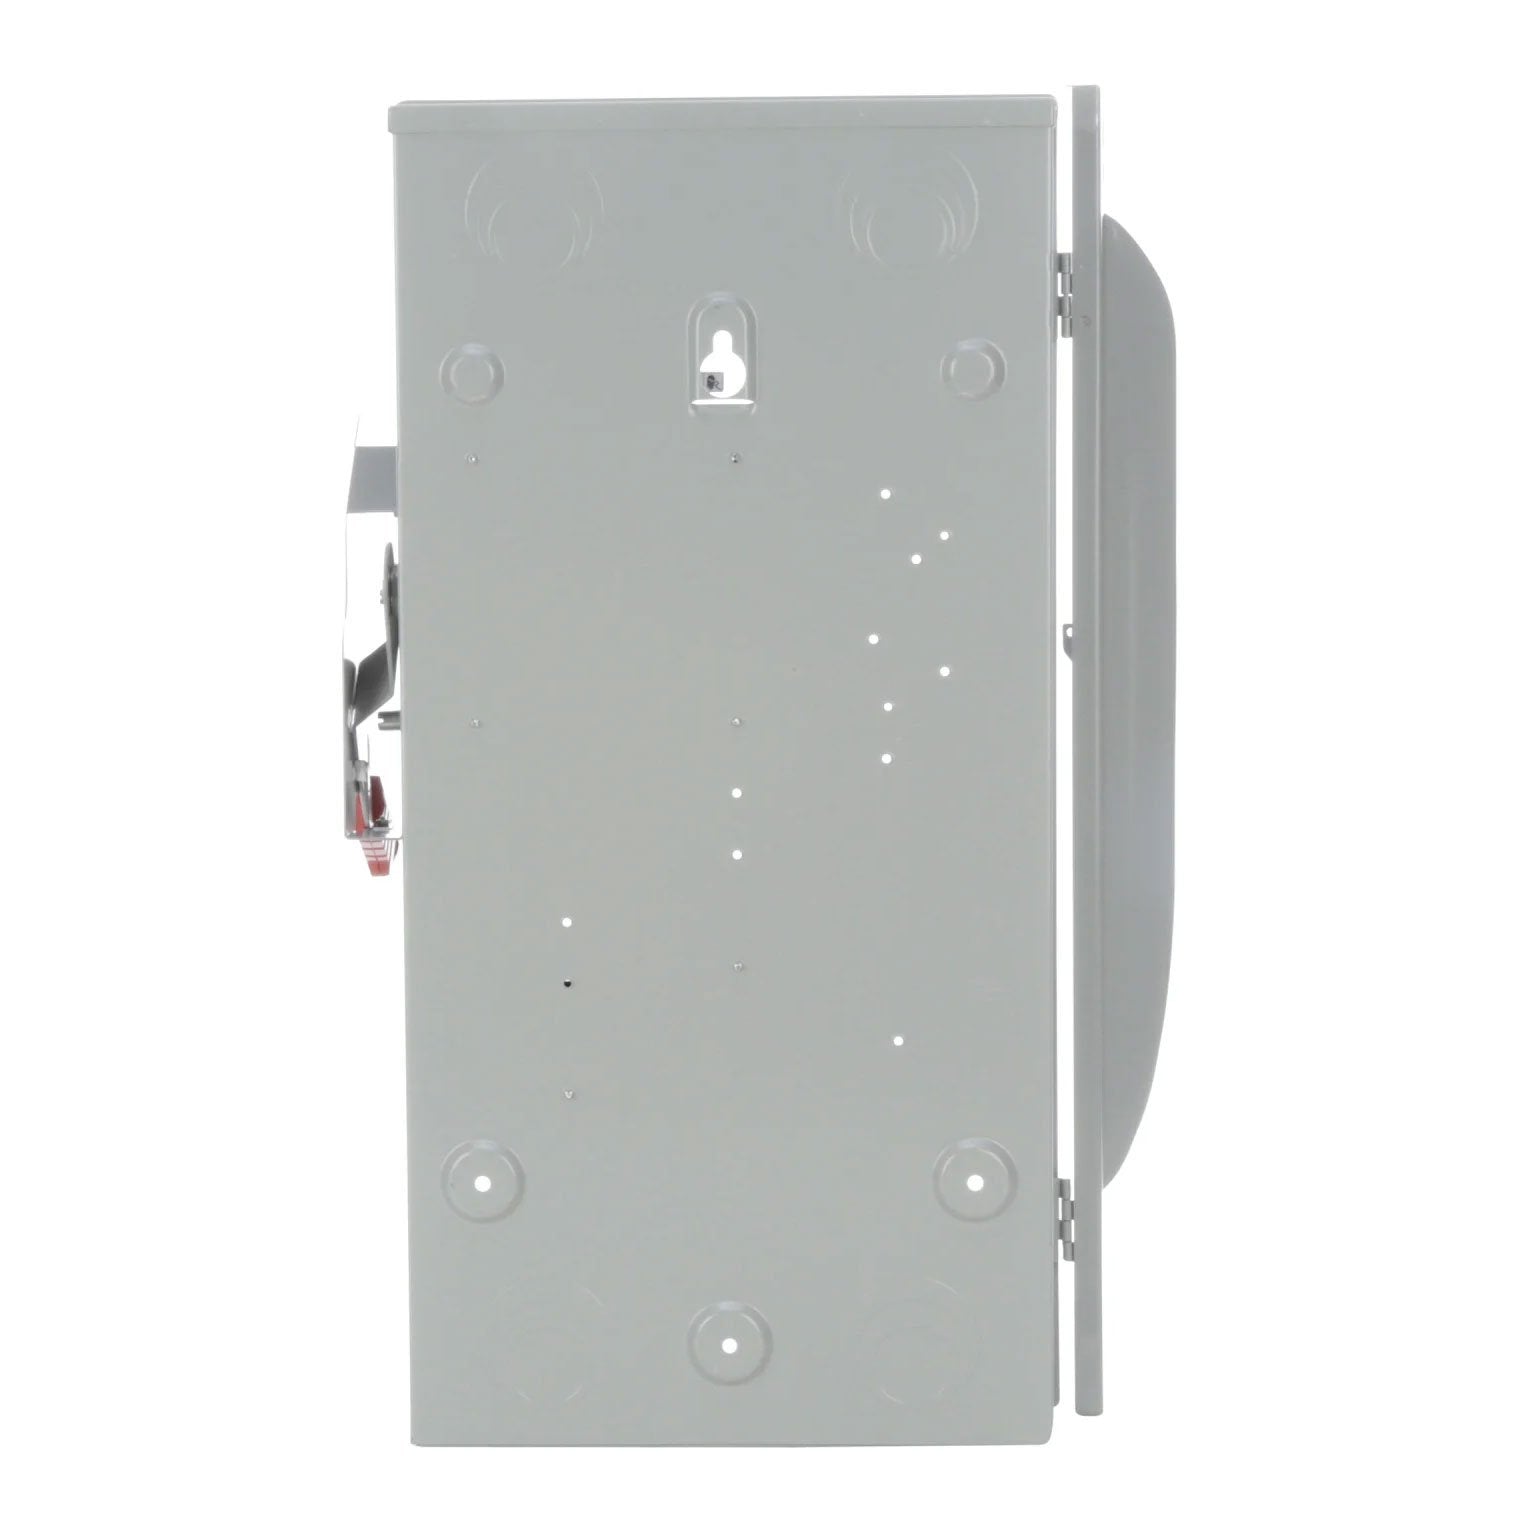 HFC364 - Siemens - 200 Amp Disconnect Safety Switches